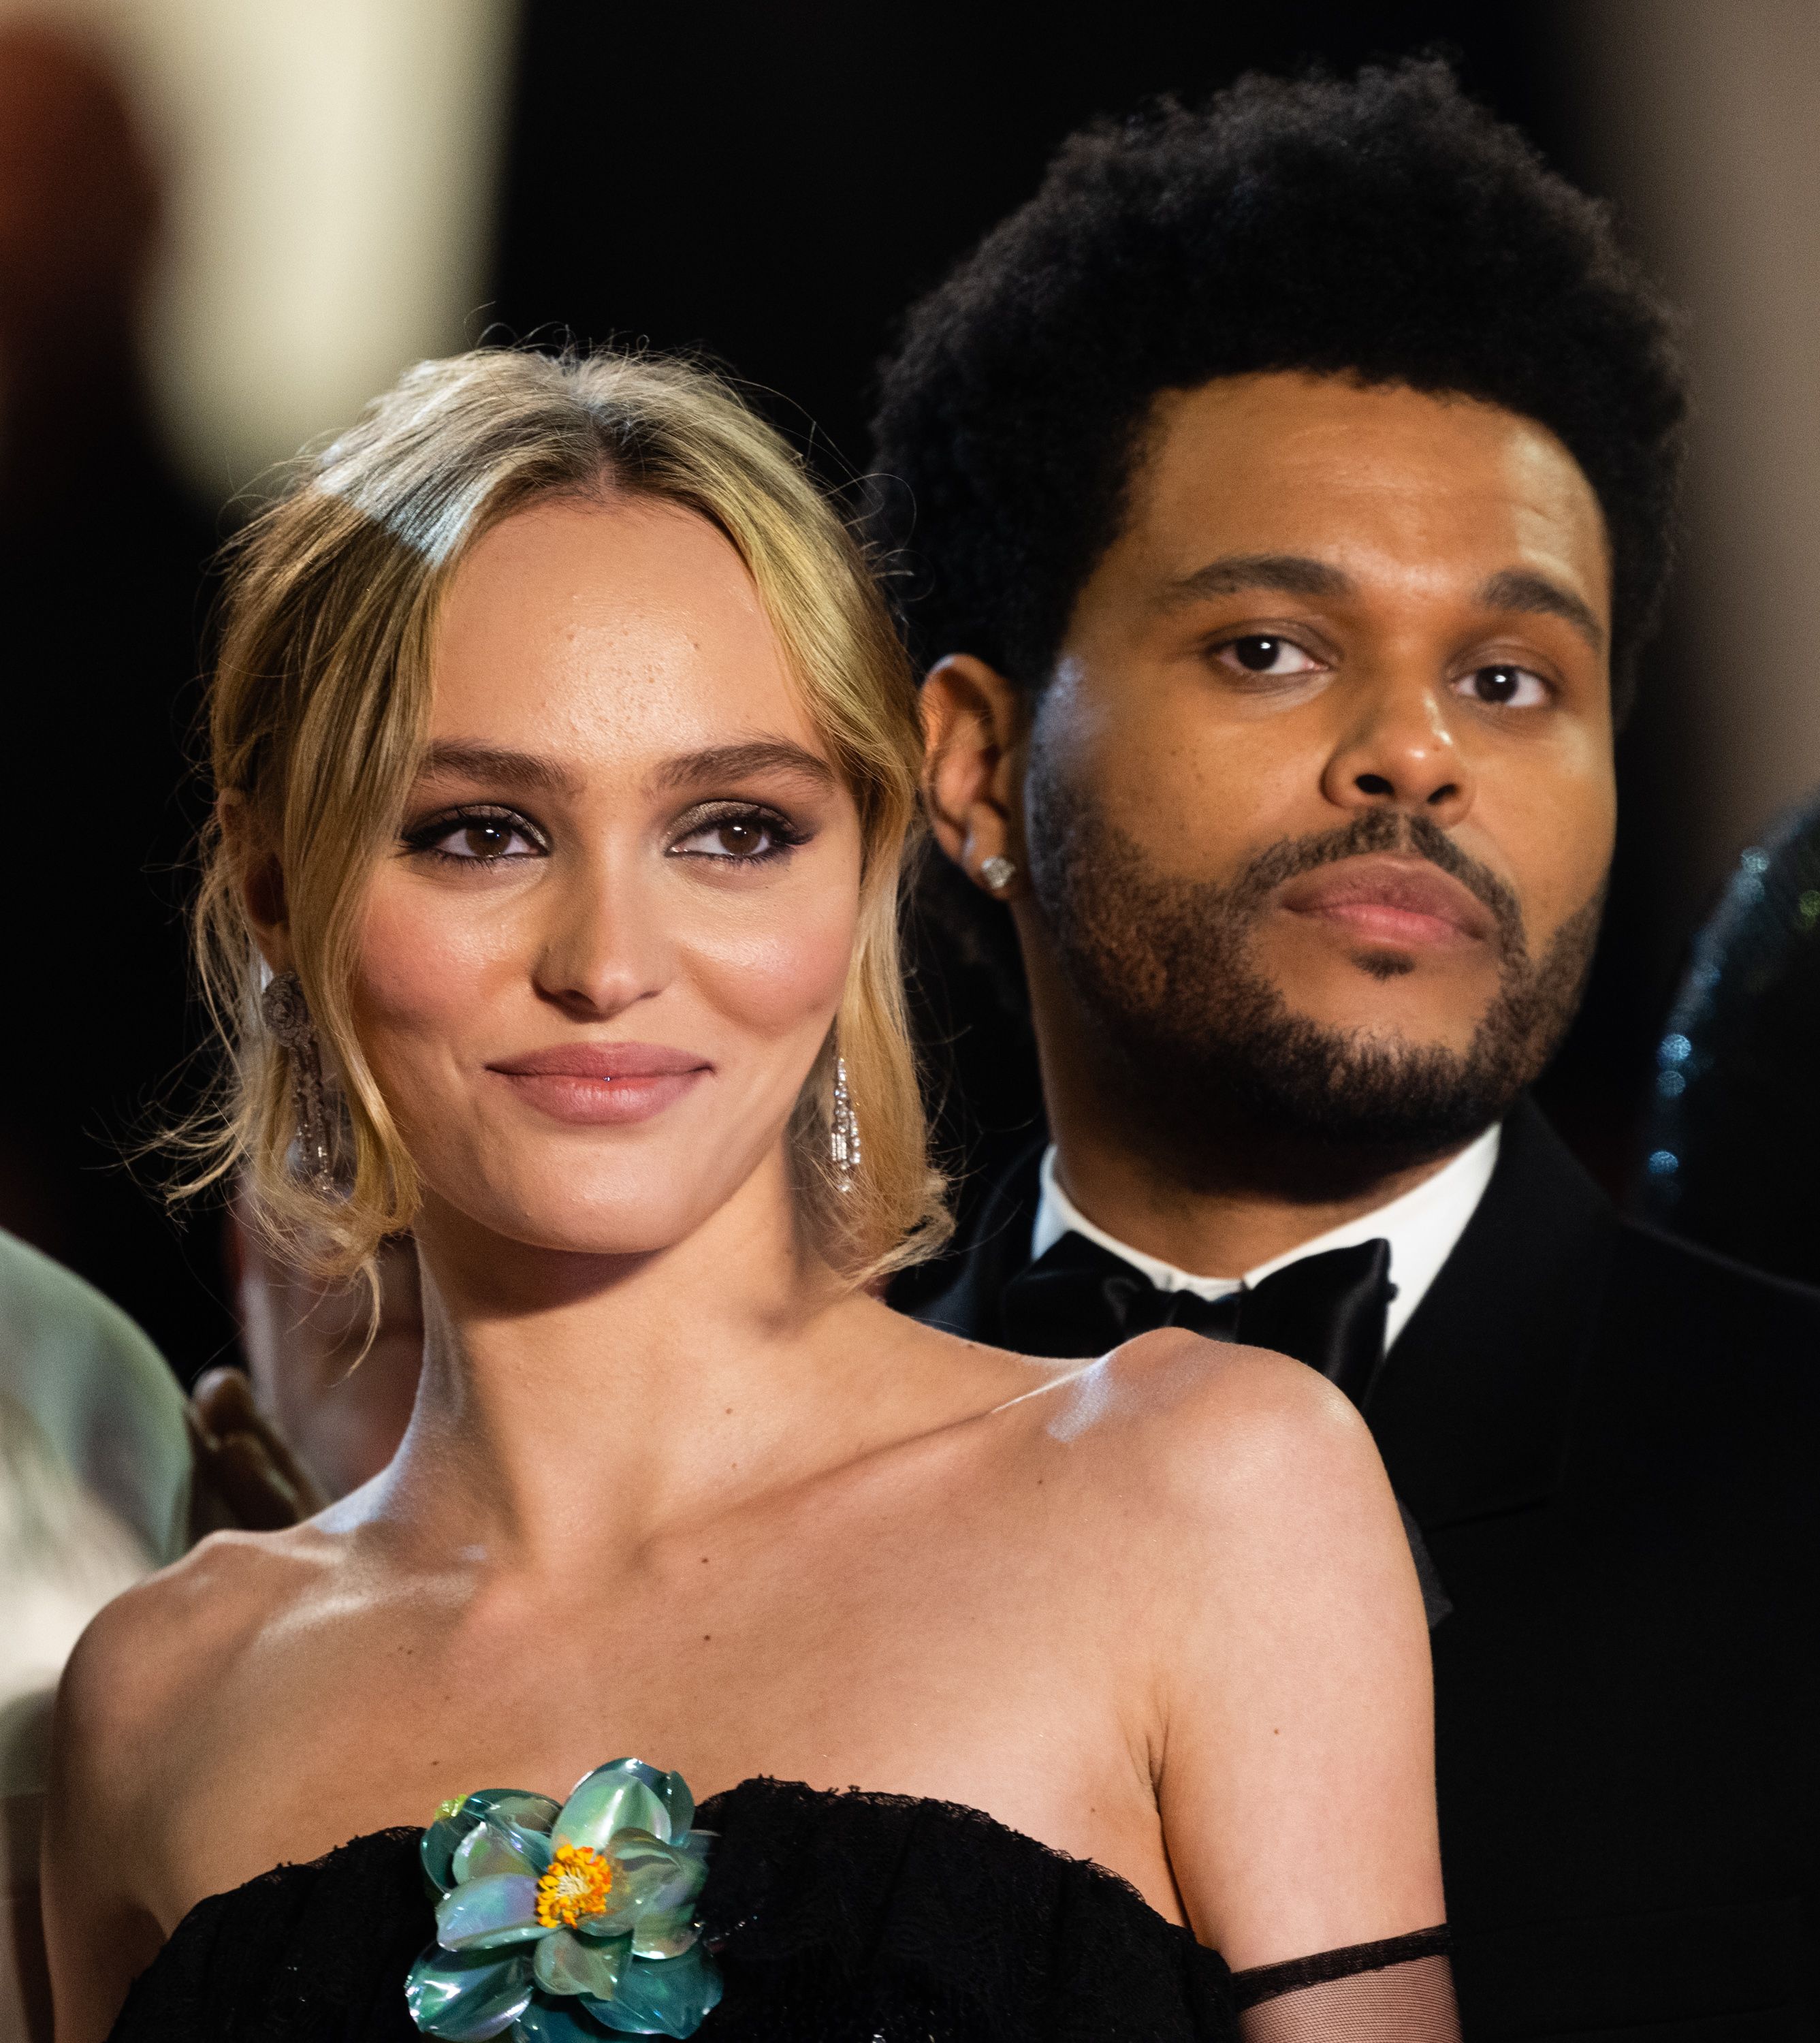 Lily-Rose Depp, Weeknd Raise Eyebrows with “The ﻿Idol” at Cannes